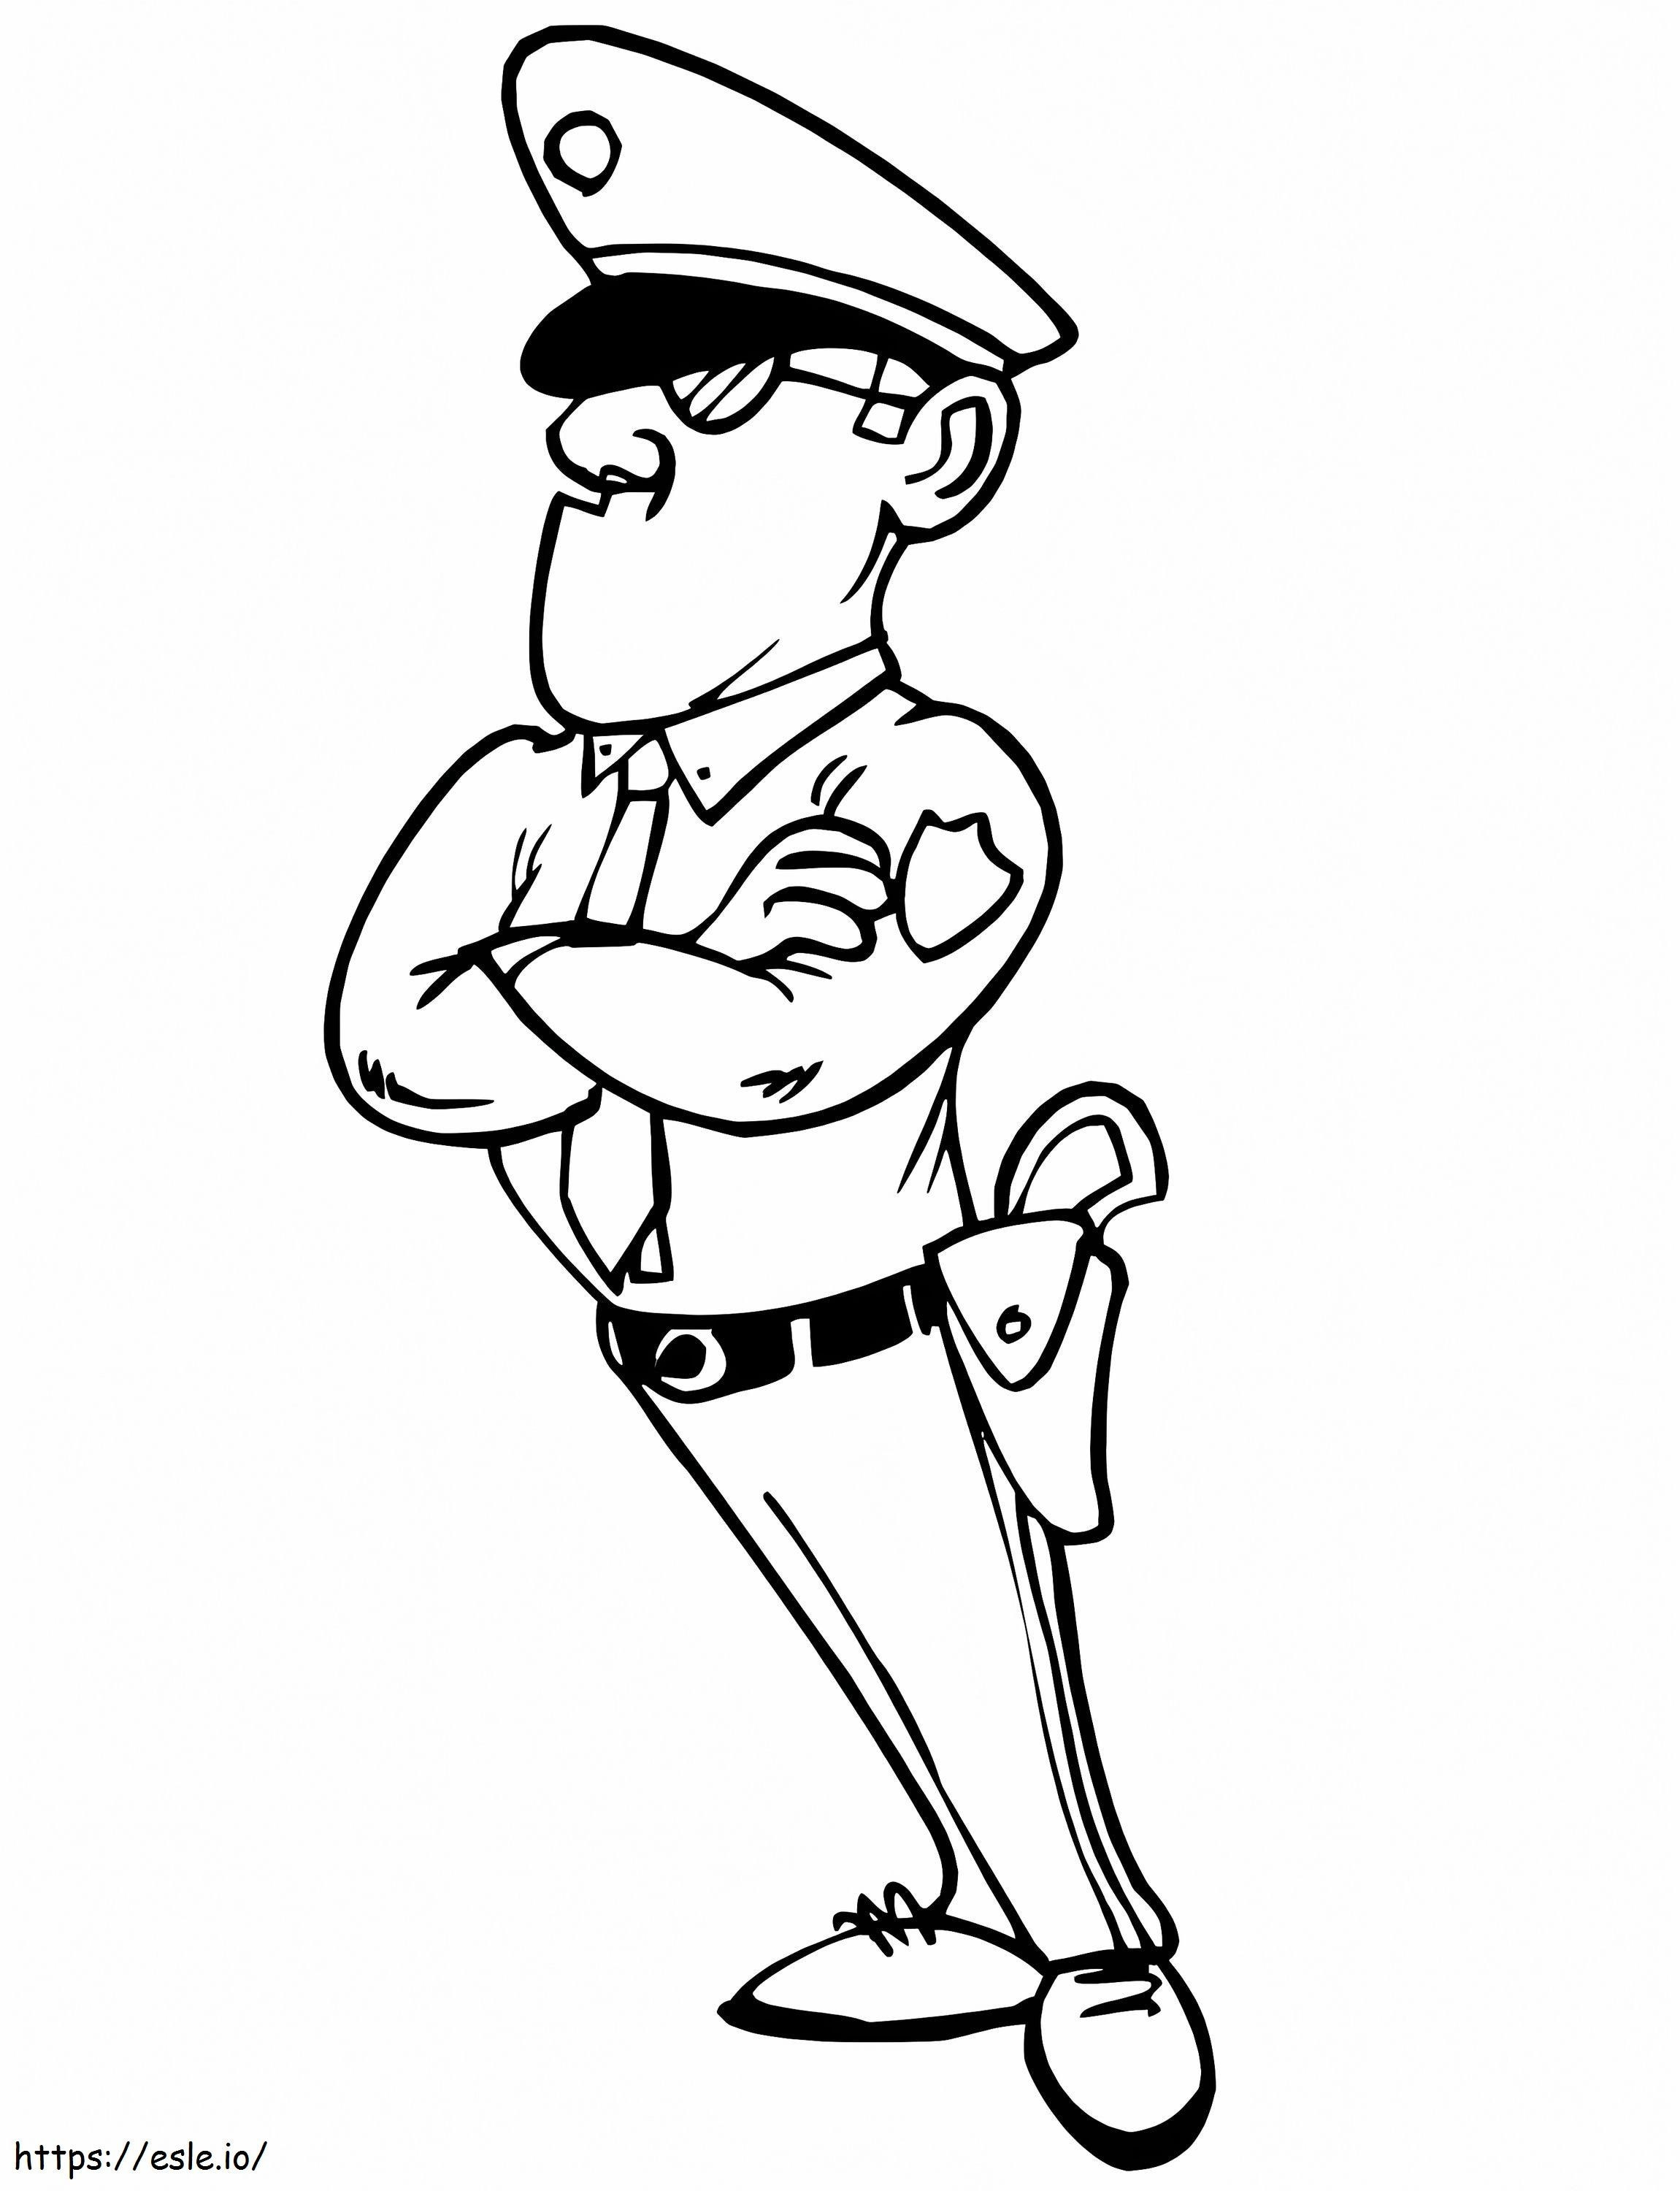 Police Officer Coloring Page coloring page